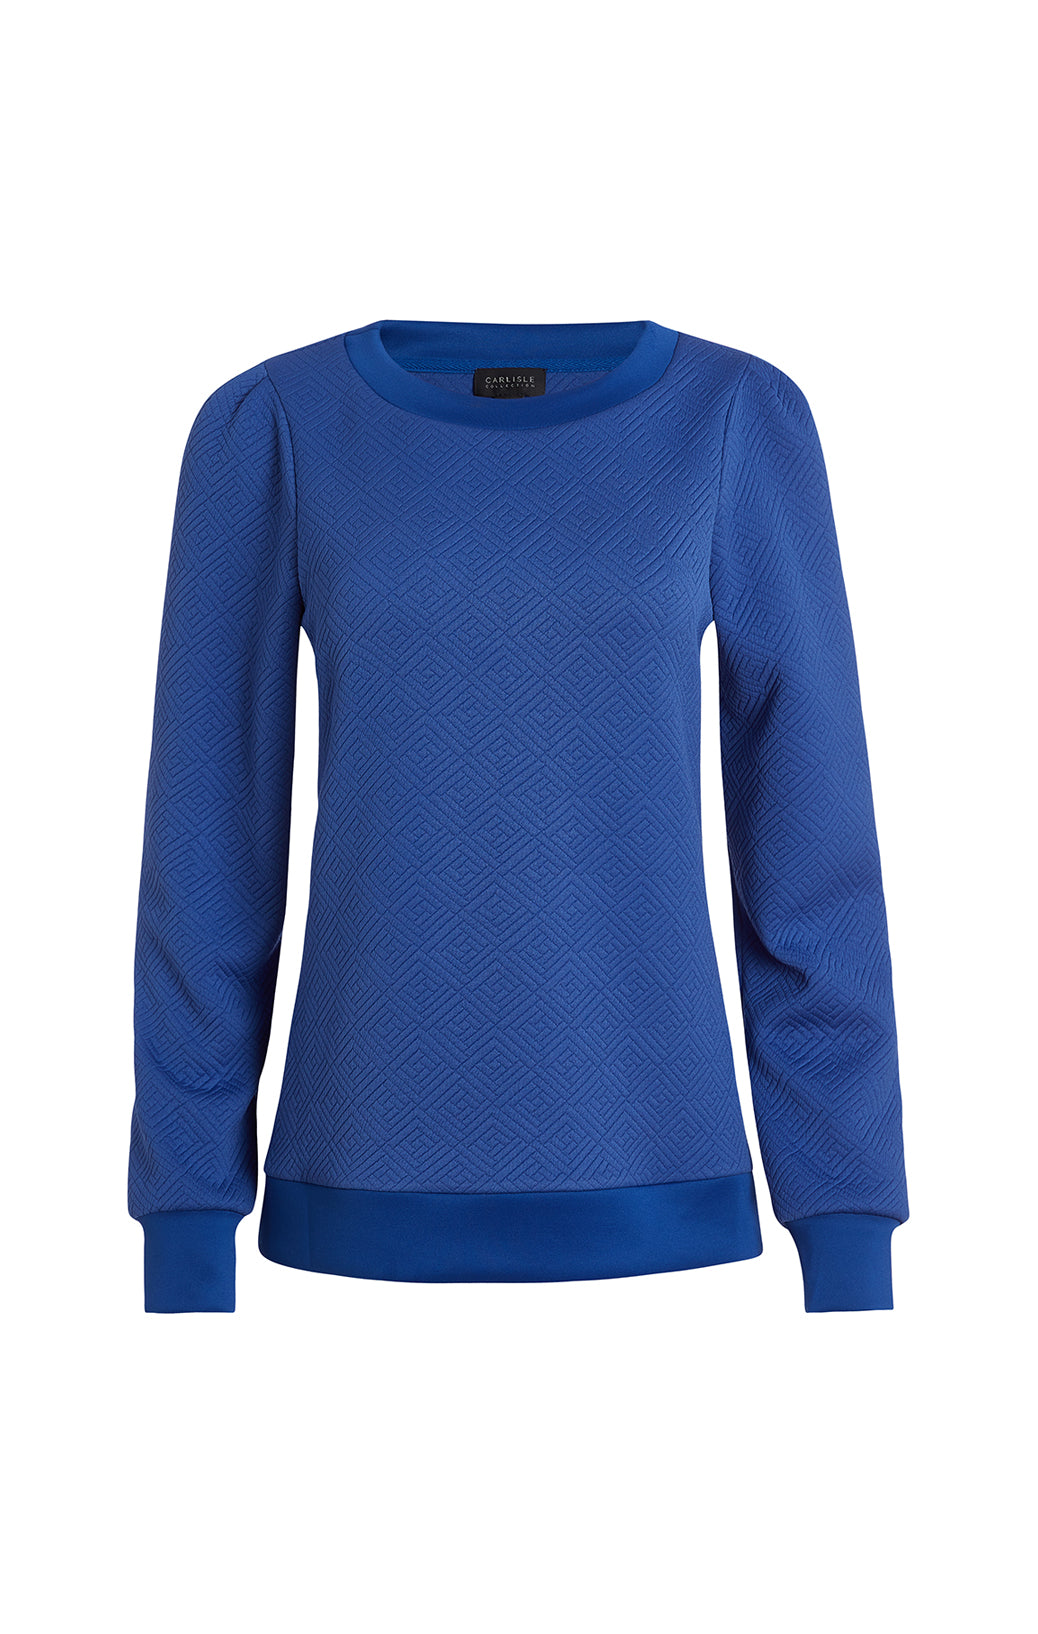 Disport - Ruffled Mixed-Stripe Sweater -  Product Image